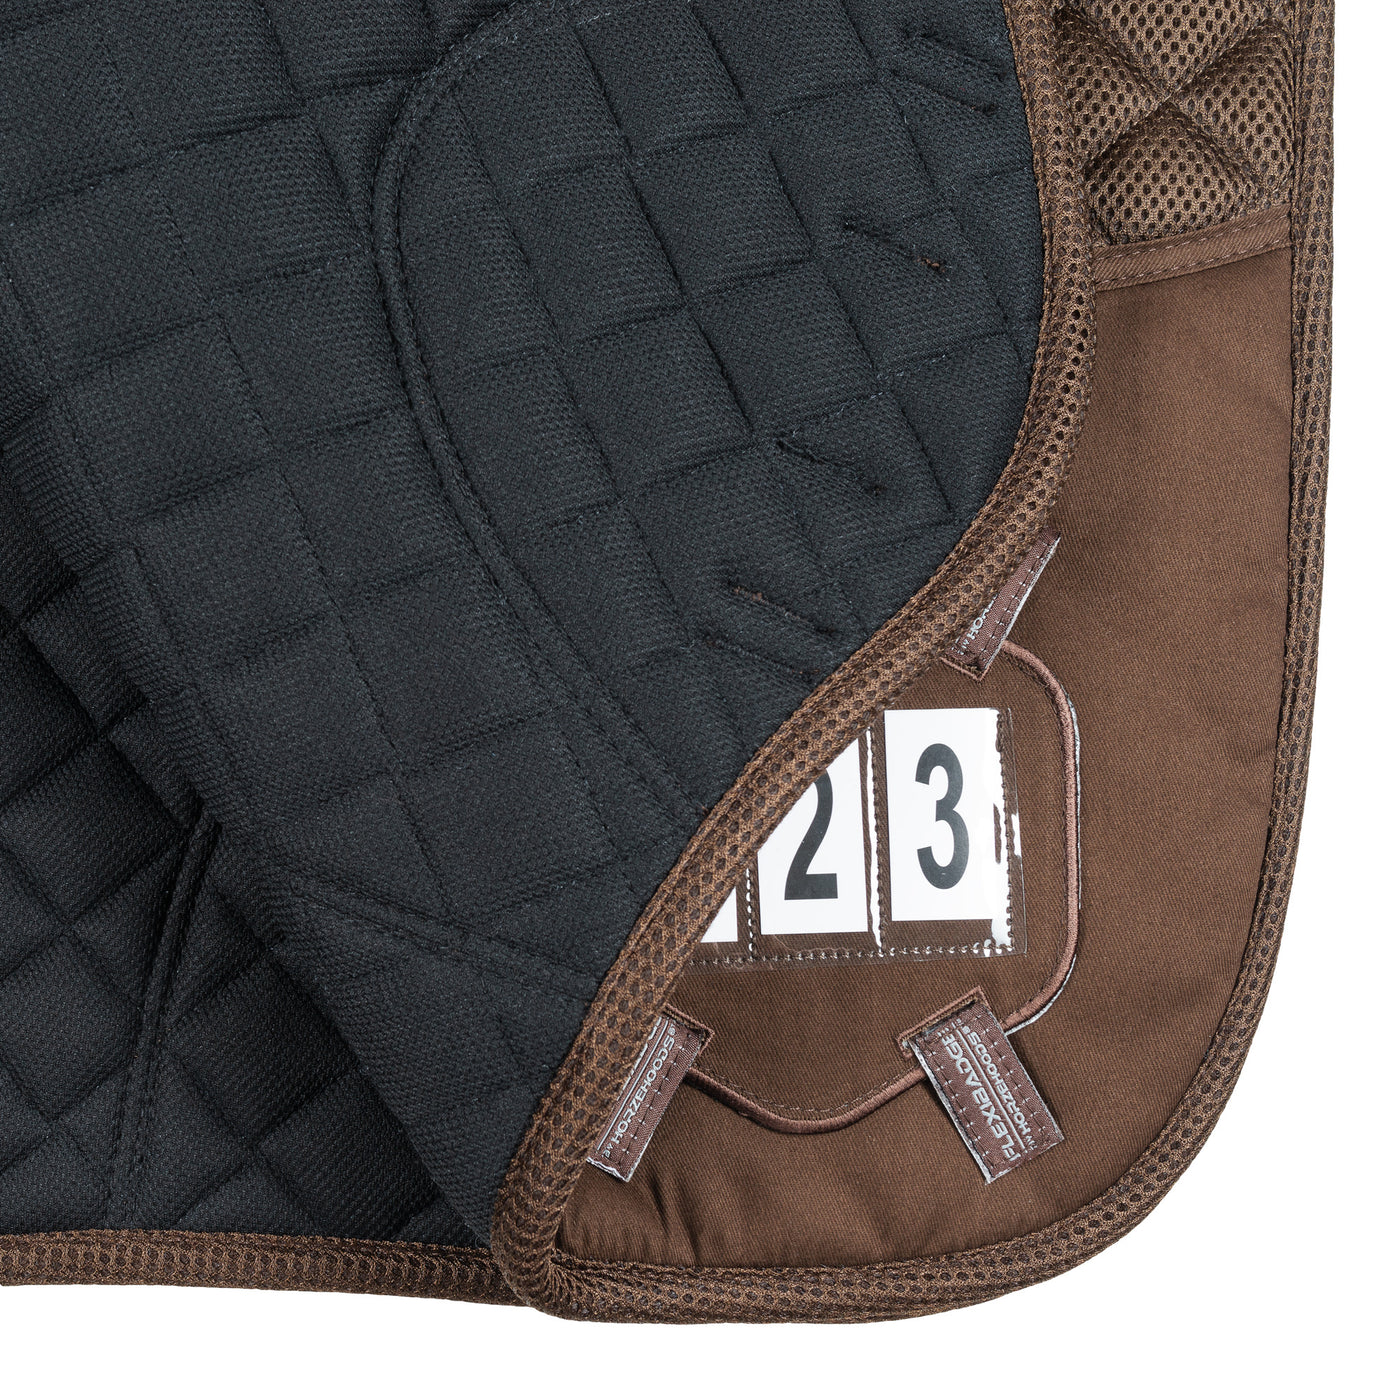 Brown FlexiBadge4D™️ Competition Pad GP/Jump KIT Pack